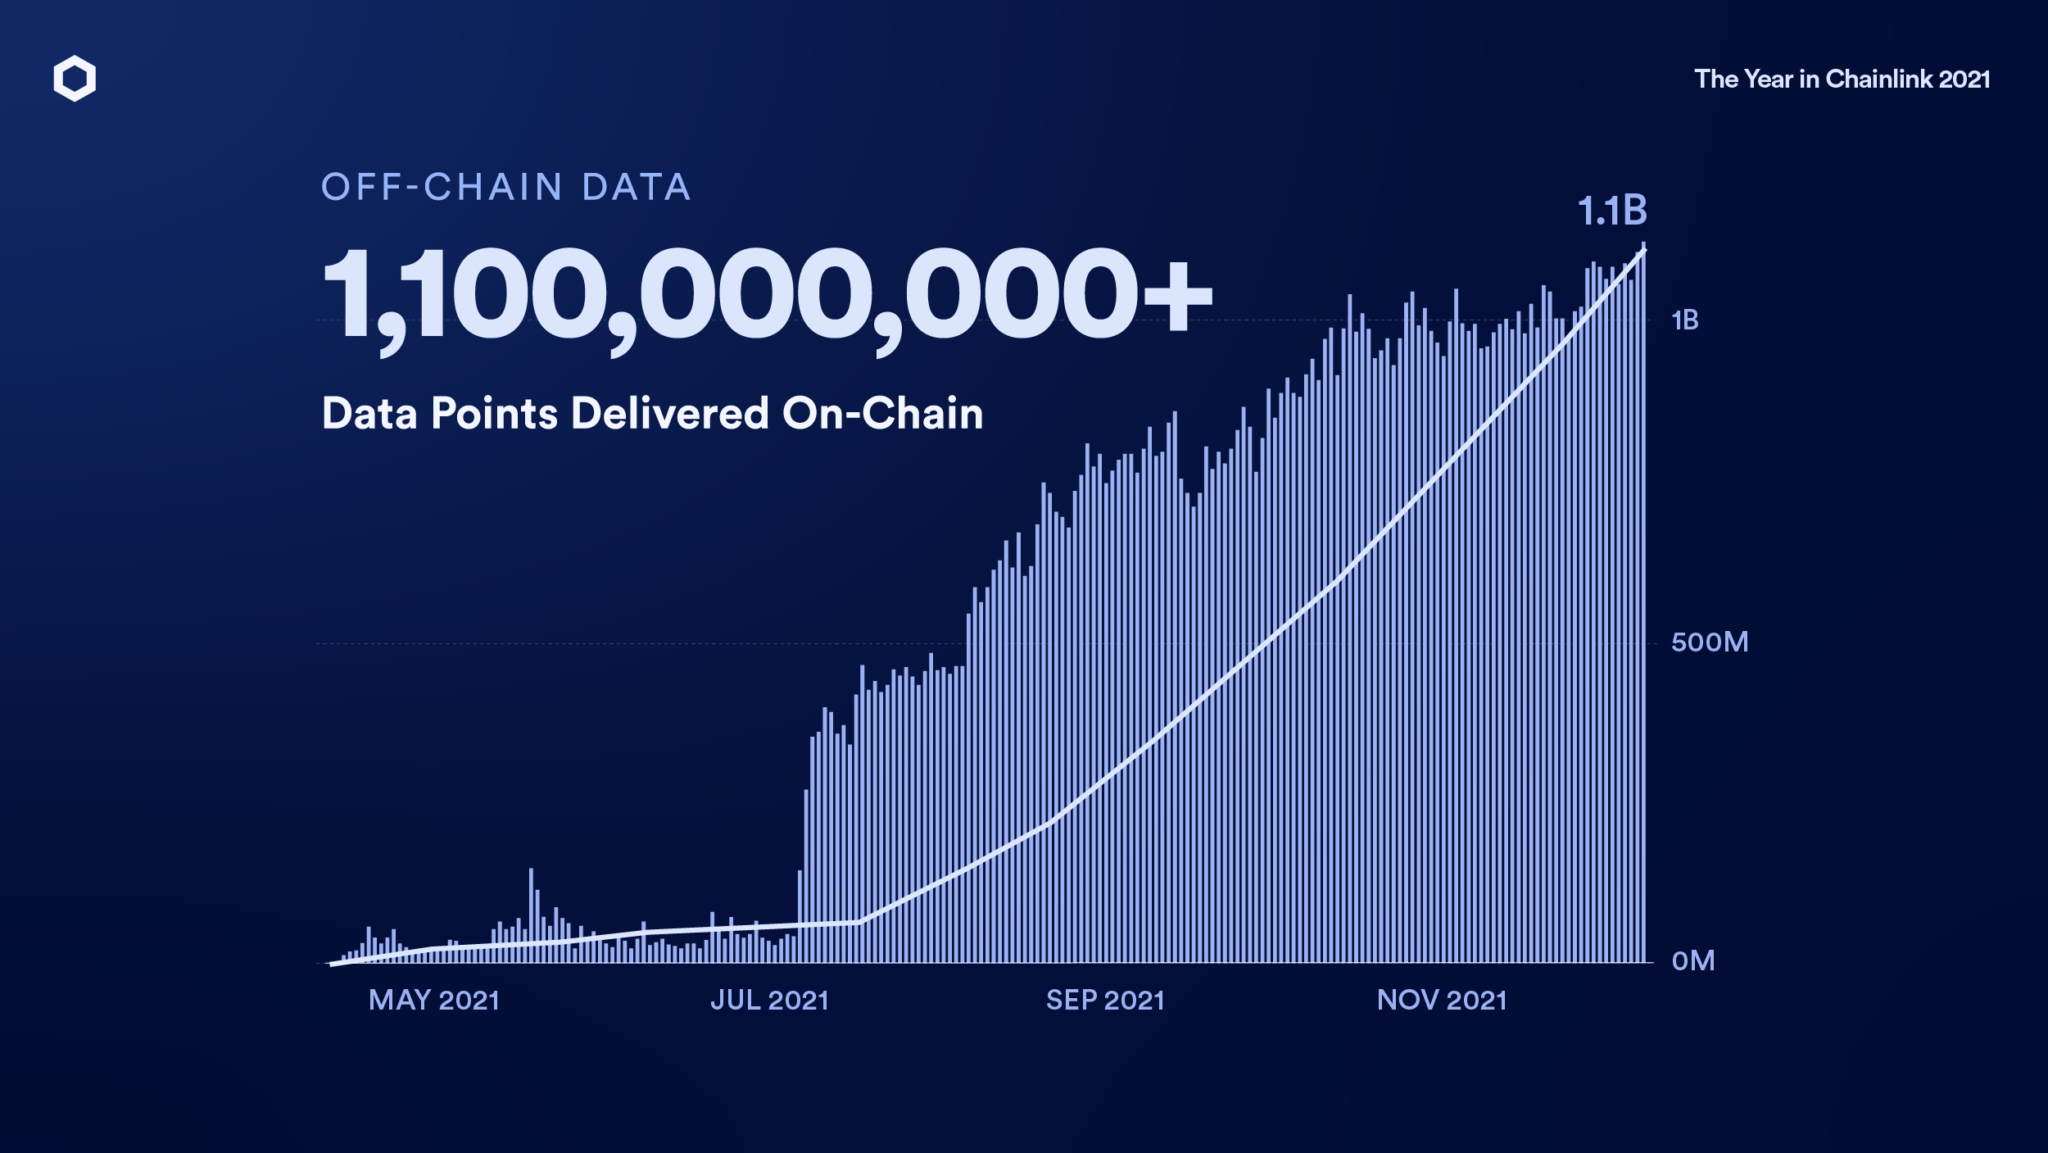 Data points delivered on-chain (Source: Chainlink)